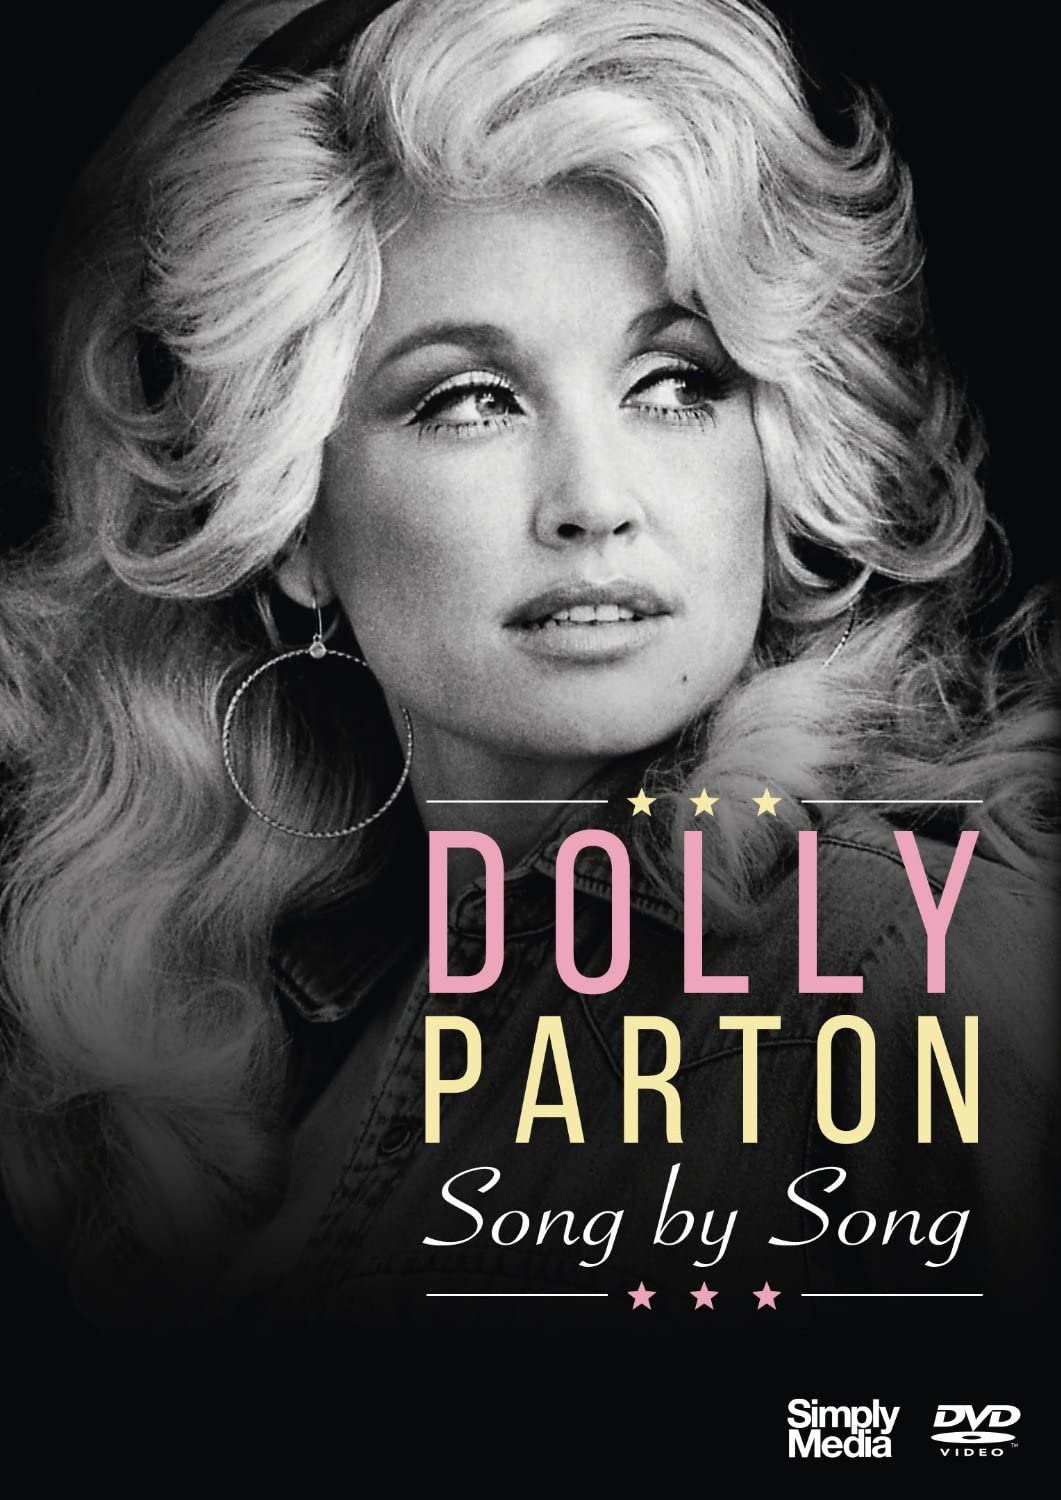 Dolly Parton Song by Song - [DVD]